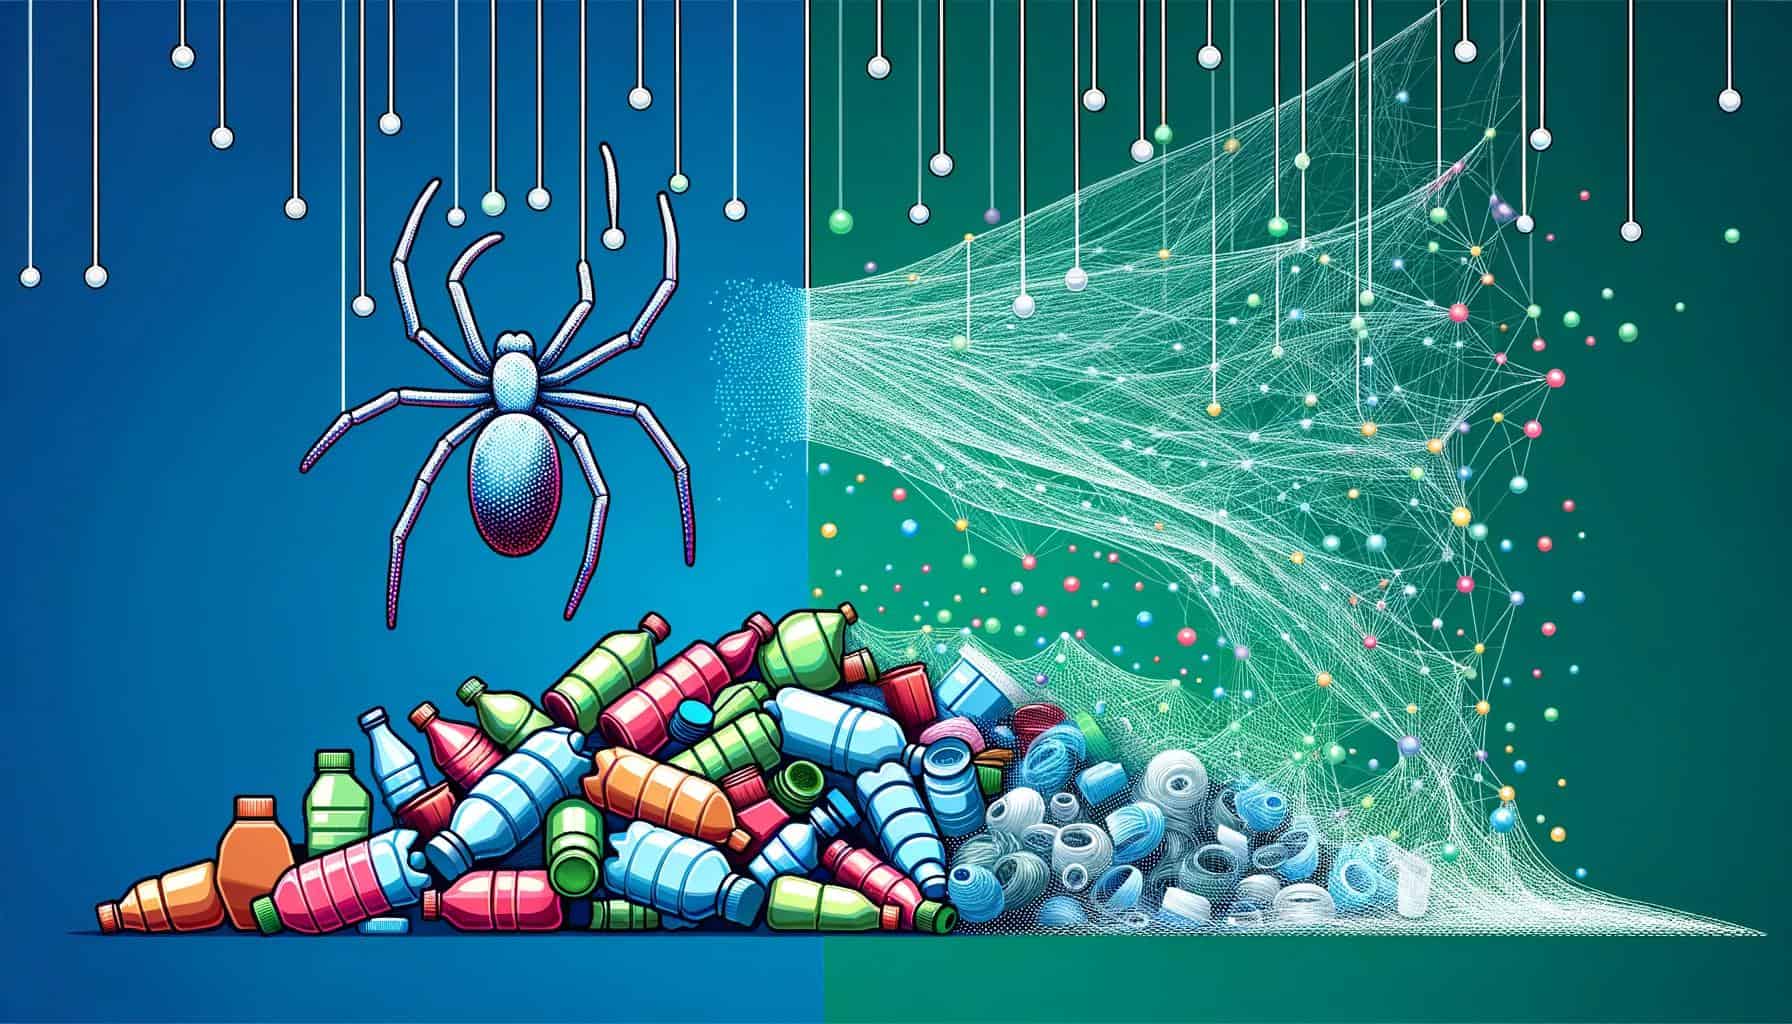 Bacteria Turns Plastic Waste Into Super-strong Spider Silk